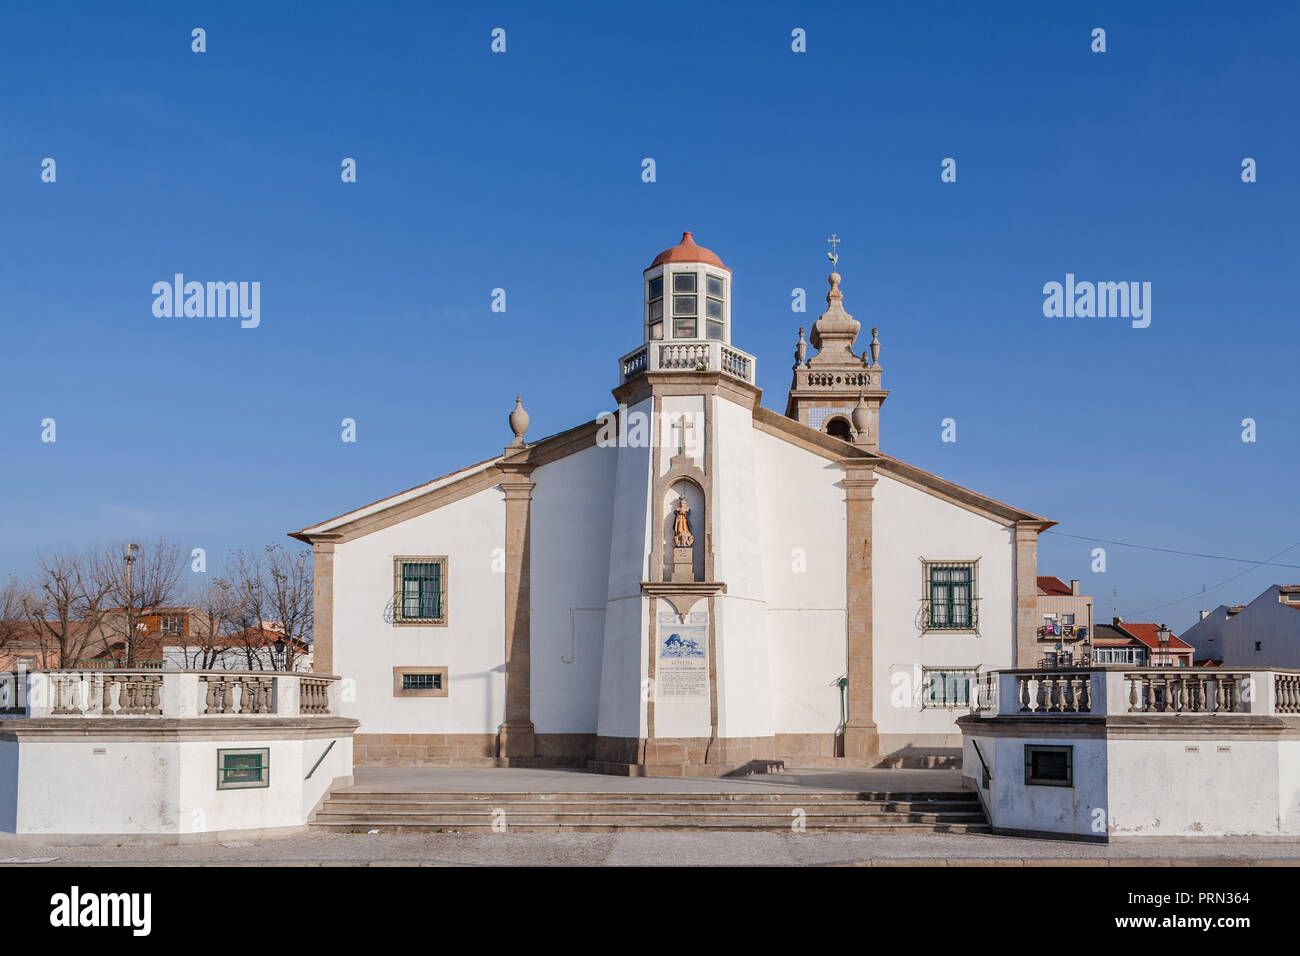 Nossa Senhora da Lapa church with a lighthouse imbedded in Povoa de Varzim, Portugal. Where local fishermen and families seek help in times of danger Stock Photo